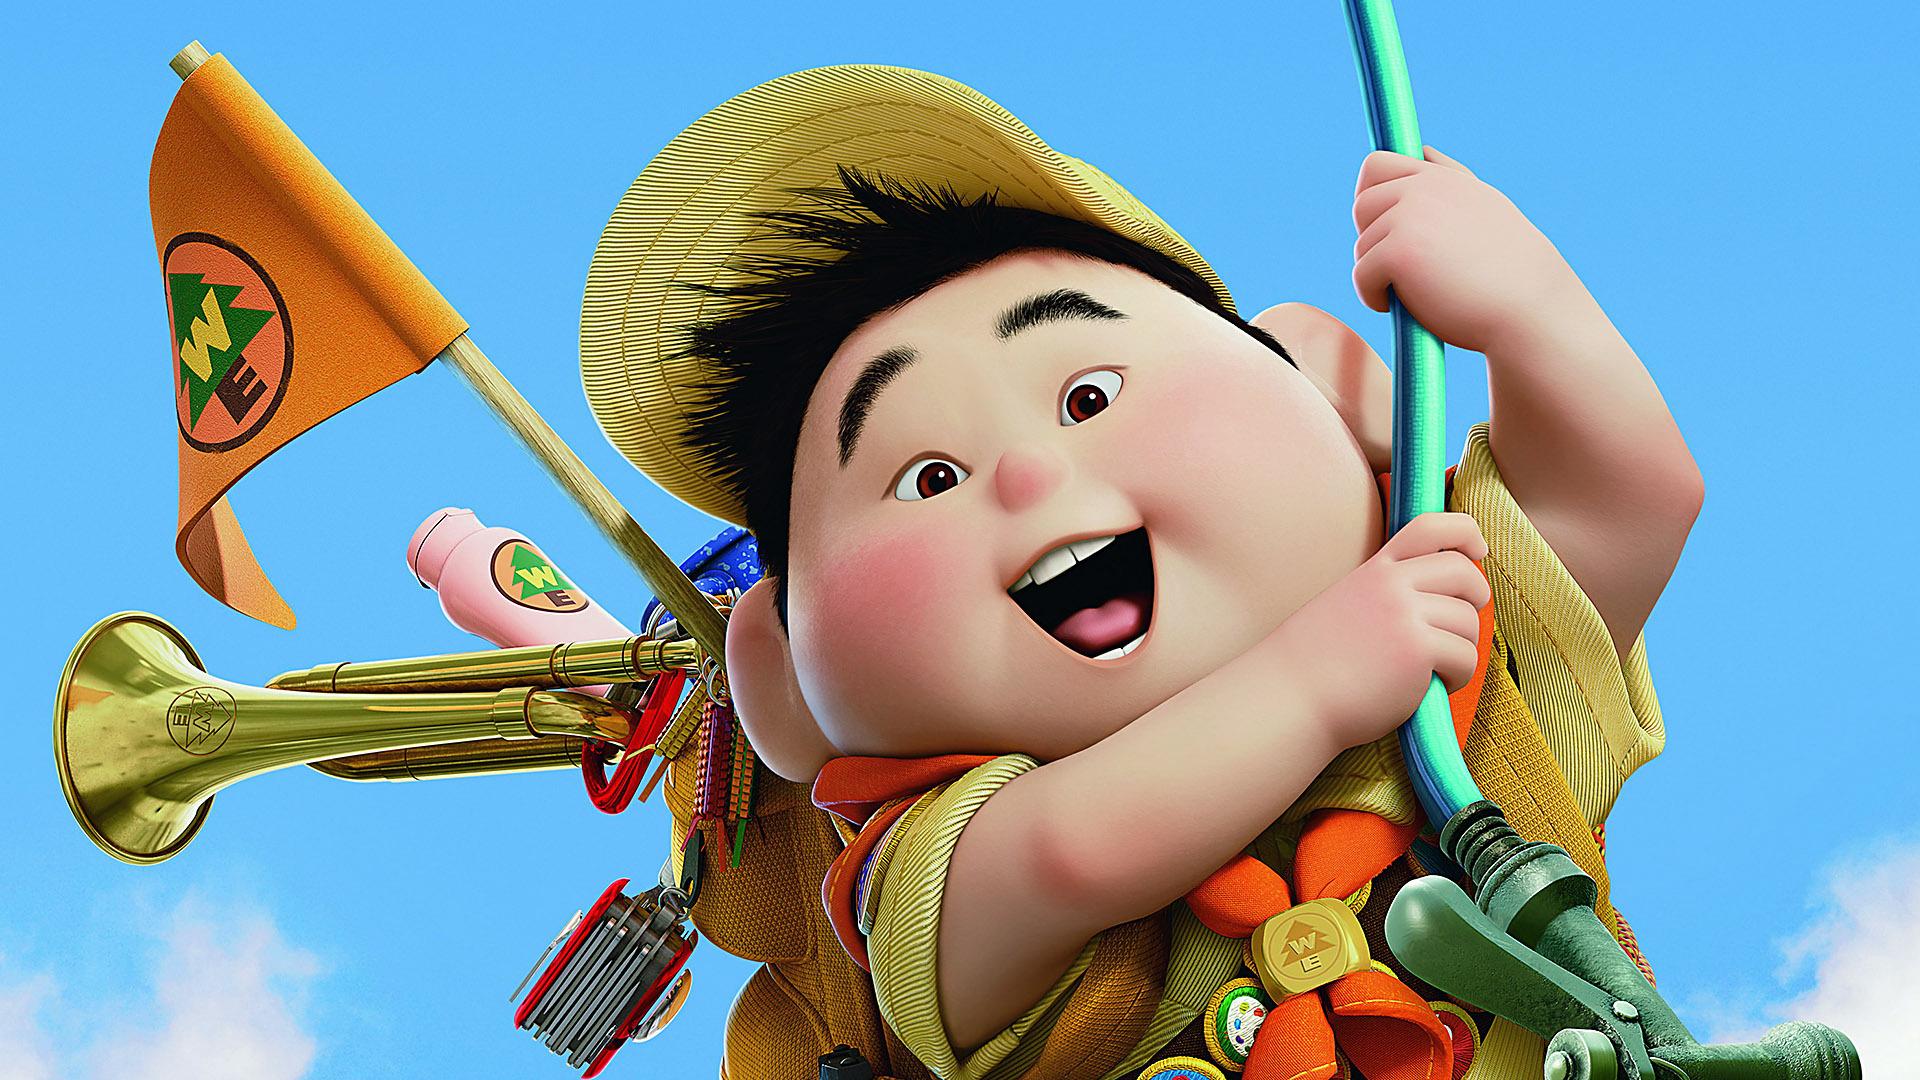 Up Movie 3d Characters Image Wallpaper HD Widescreen